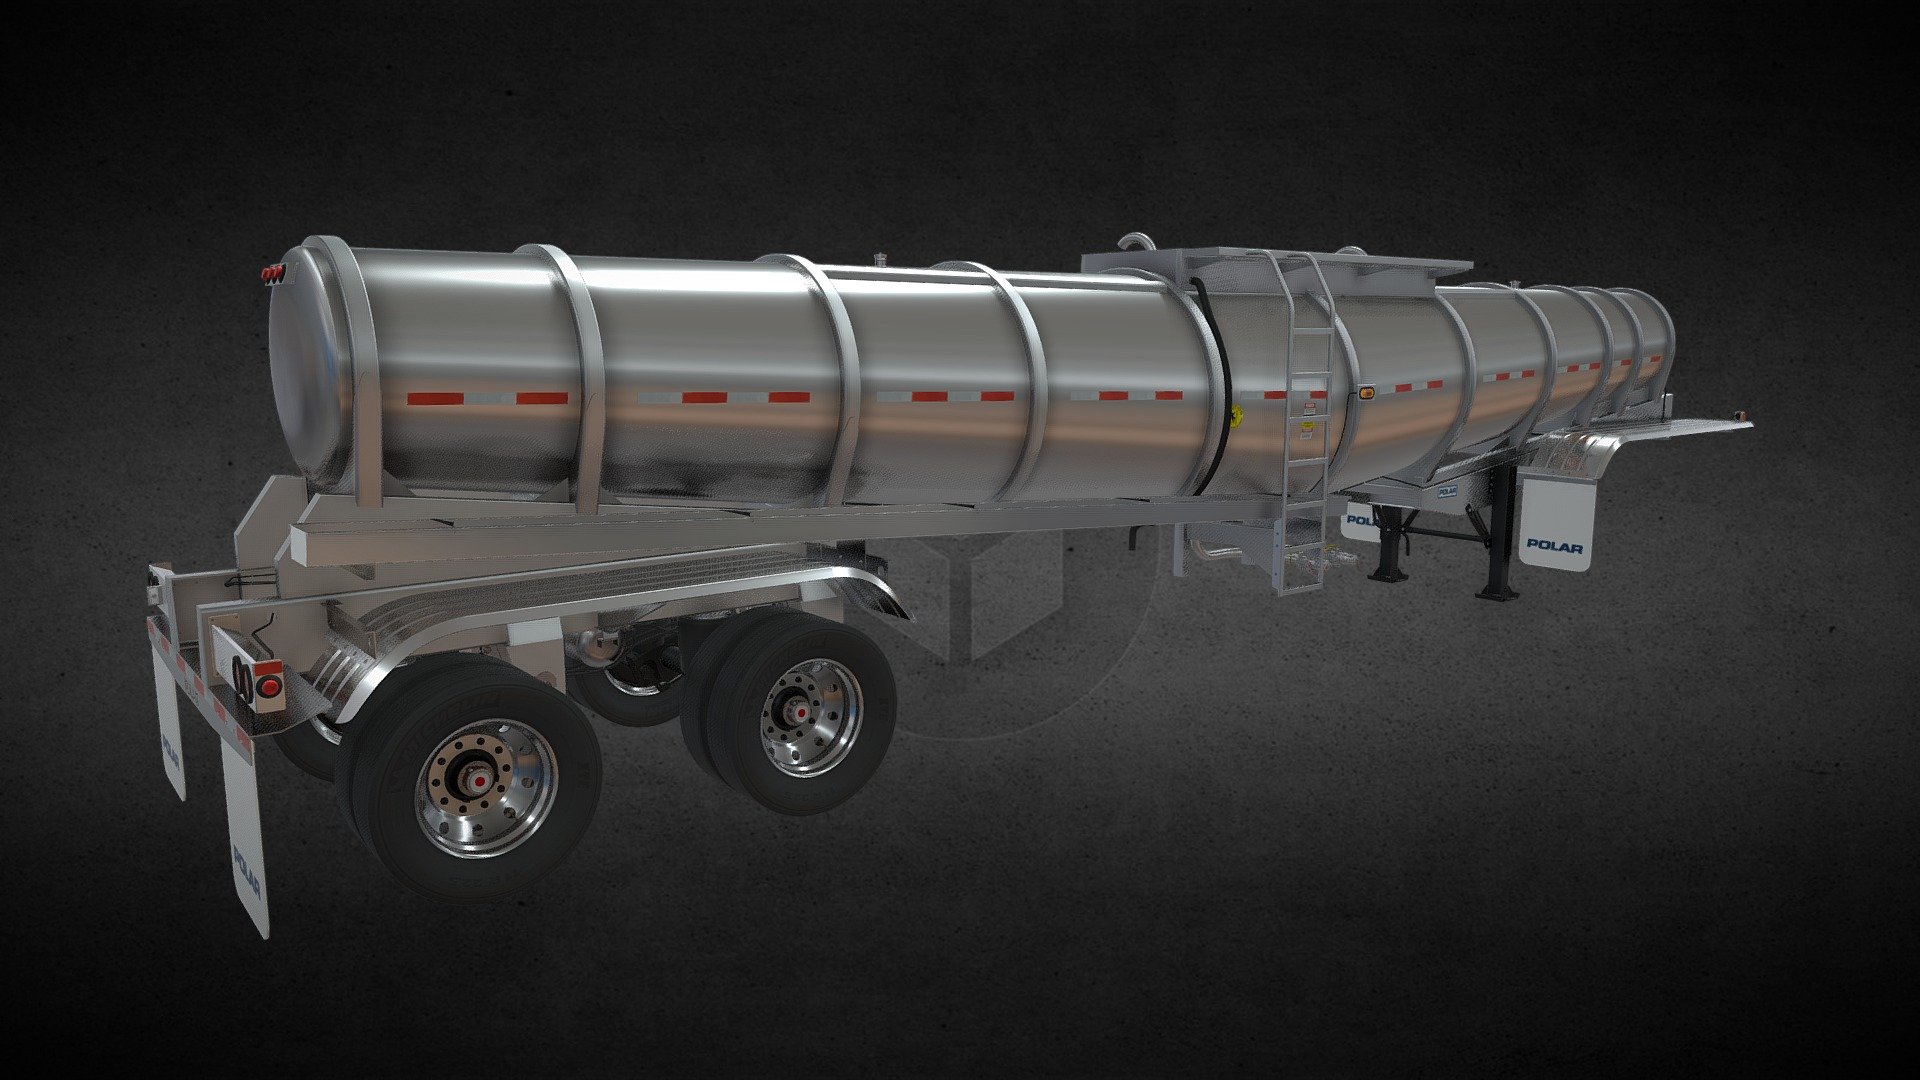 High-detailed 3D model of the 2020 Polar Deep Drop Trailer. Modeled in Blender 2.80 and Rendered in Cycles - 2020 Deep Drop PolarTank Trailer - 3D model by Habdorn 3d model